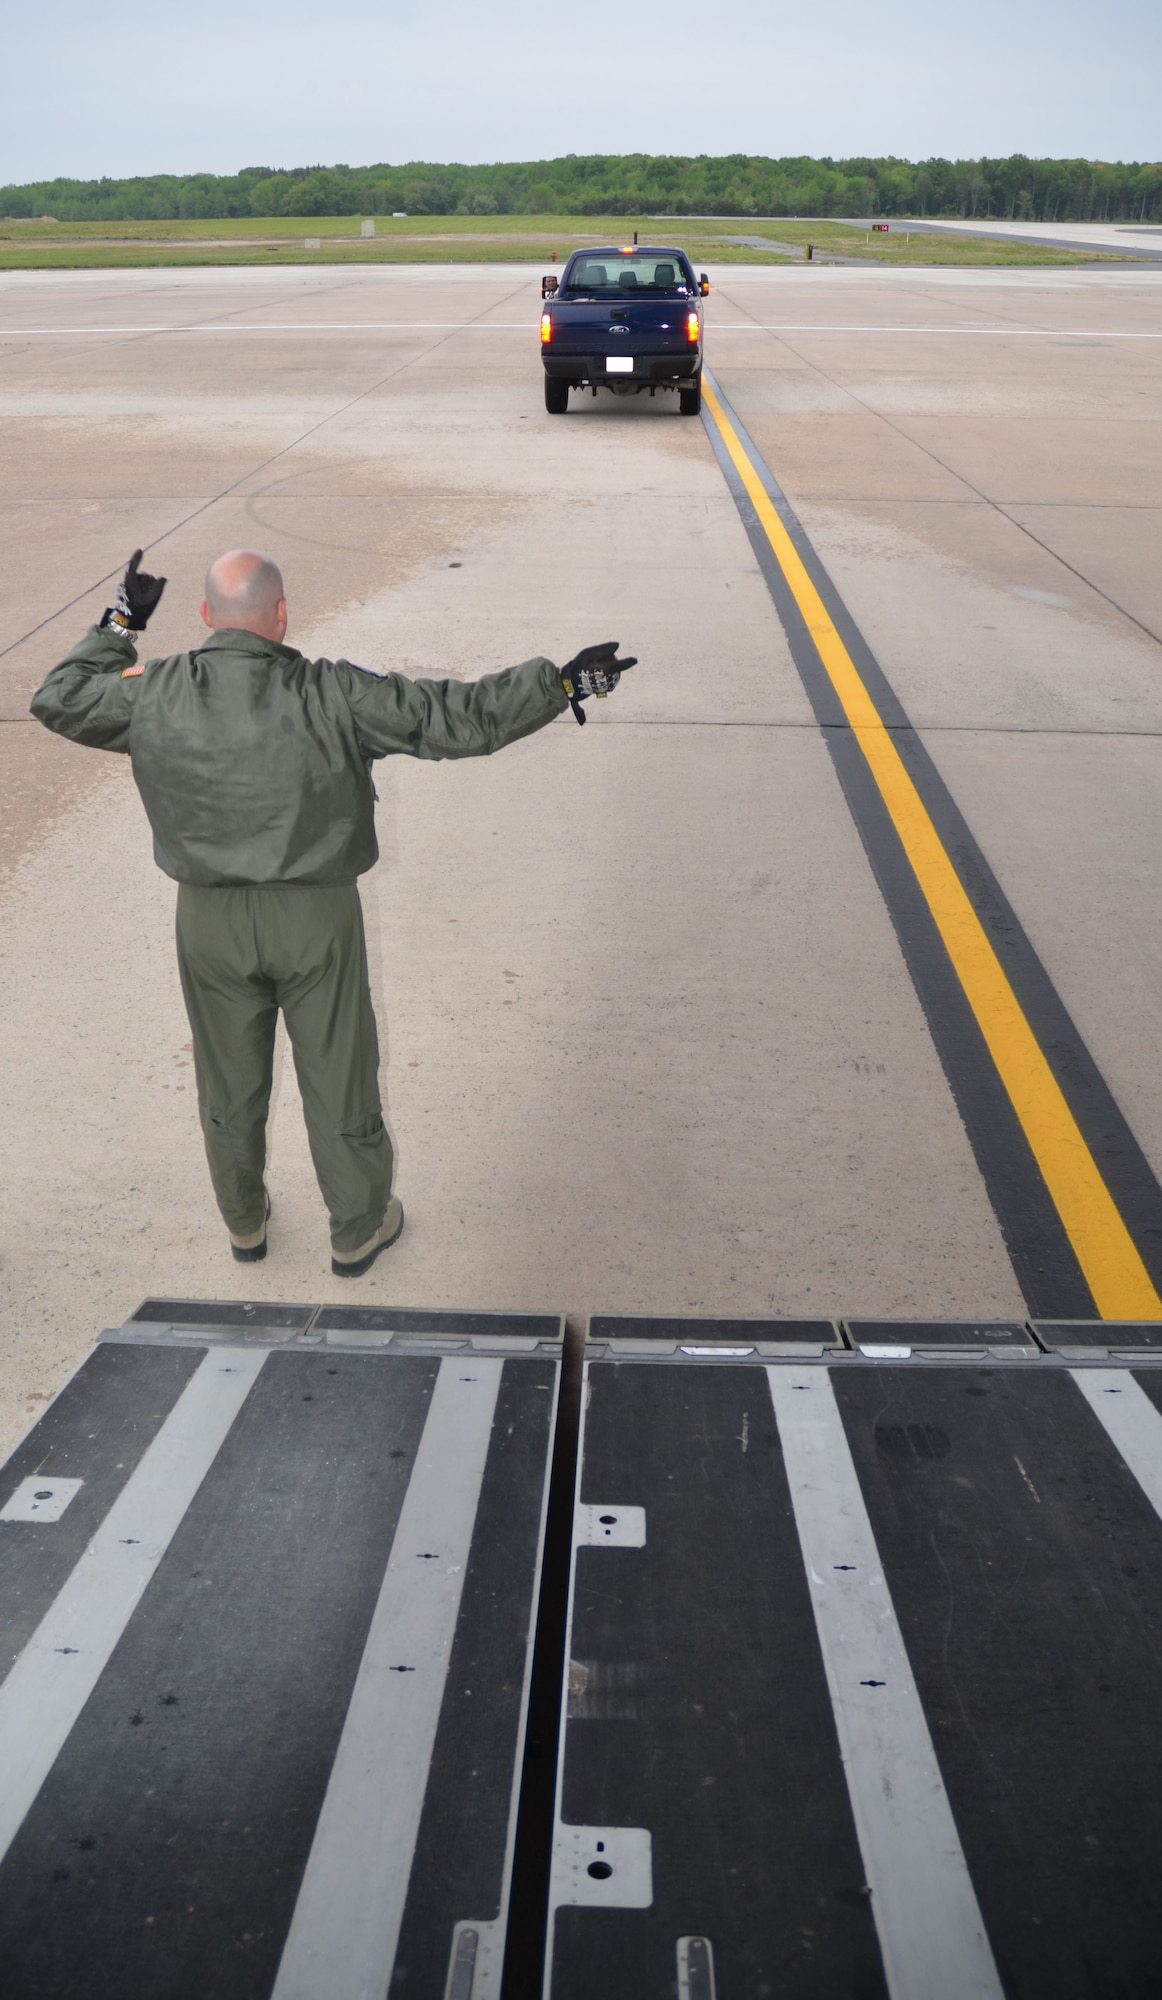 Master Sgt. Henry Fortney, 512th Airlift Control Flight loadmaster, assists with loading a truck onto a C-17 Globemaster III at Dover Air Force Base, Del., April 26, 2012 in preparation for Patriot Sands. Reservists with the 512th ALCF, 452nd ALCF, March Air Reserve Base, Calif., and 439th ALCF, Westover ARB, Mass., joined up with FBI Rapid Deployment Teams as part of Patriot Sands, an airlift exercise, at MacDill AFB, Fla., and Patrick AFB, Fla., April 26-29, 2012. (U.S. Air Force photo by Capt. Marnee A.C. Losurdo)